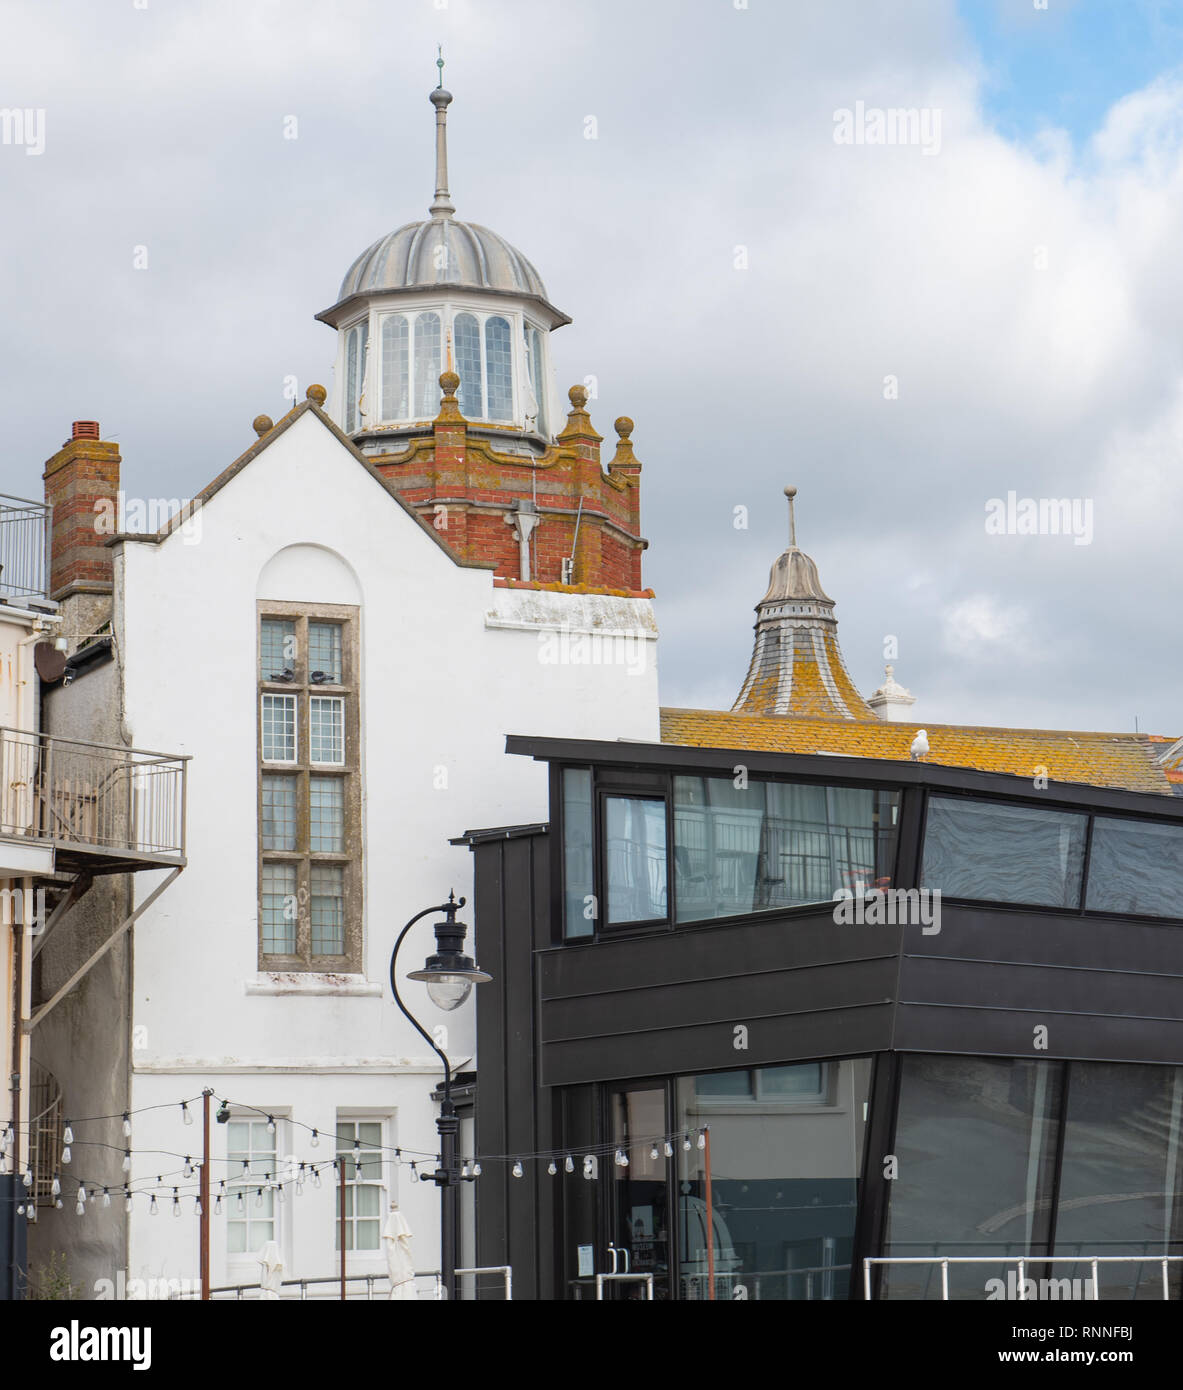 The old and new architecture of Lyme Regis Museum (The Philpot Museum) at Lyme Regis. The museum is built on the site of the home of Mary Anning. Stock Photo